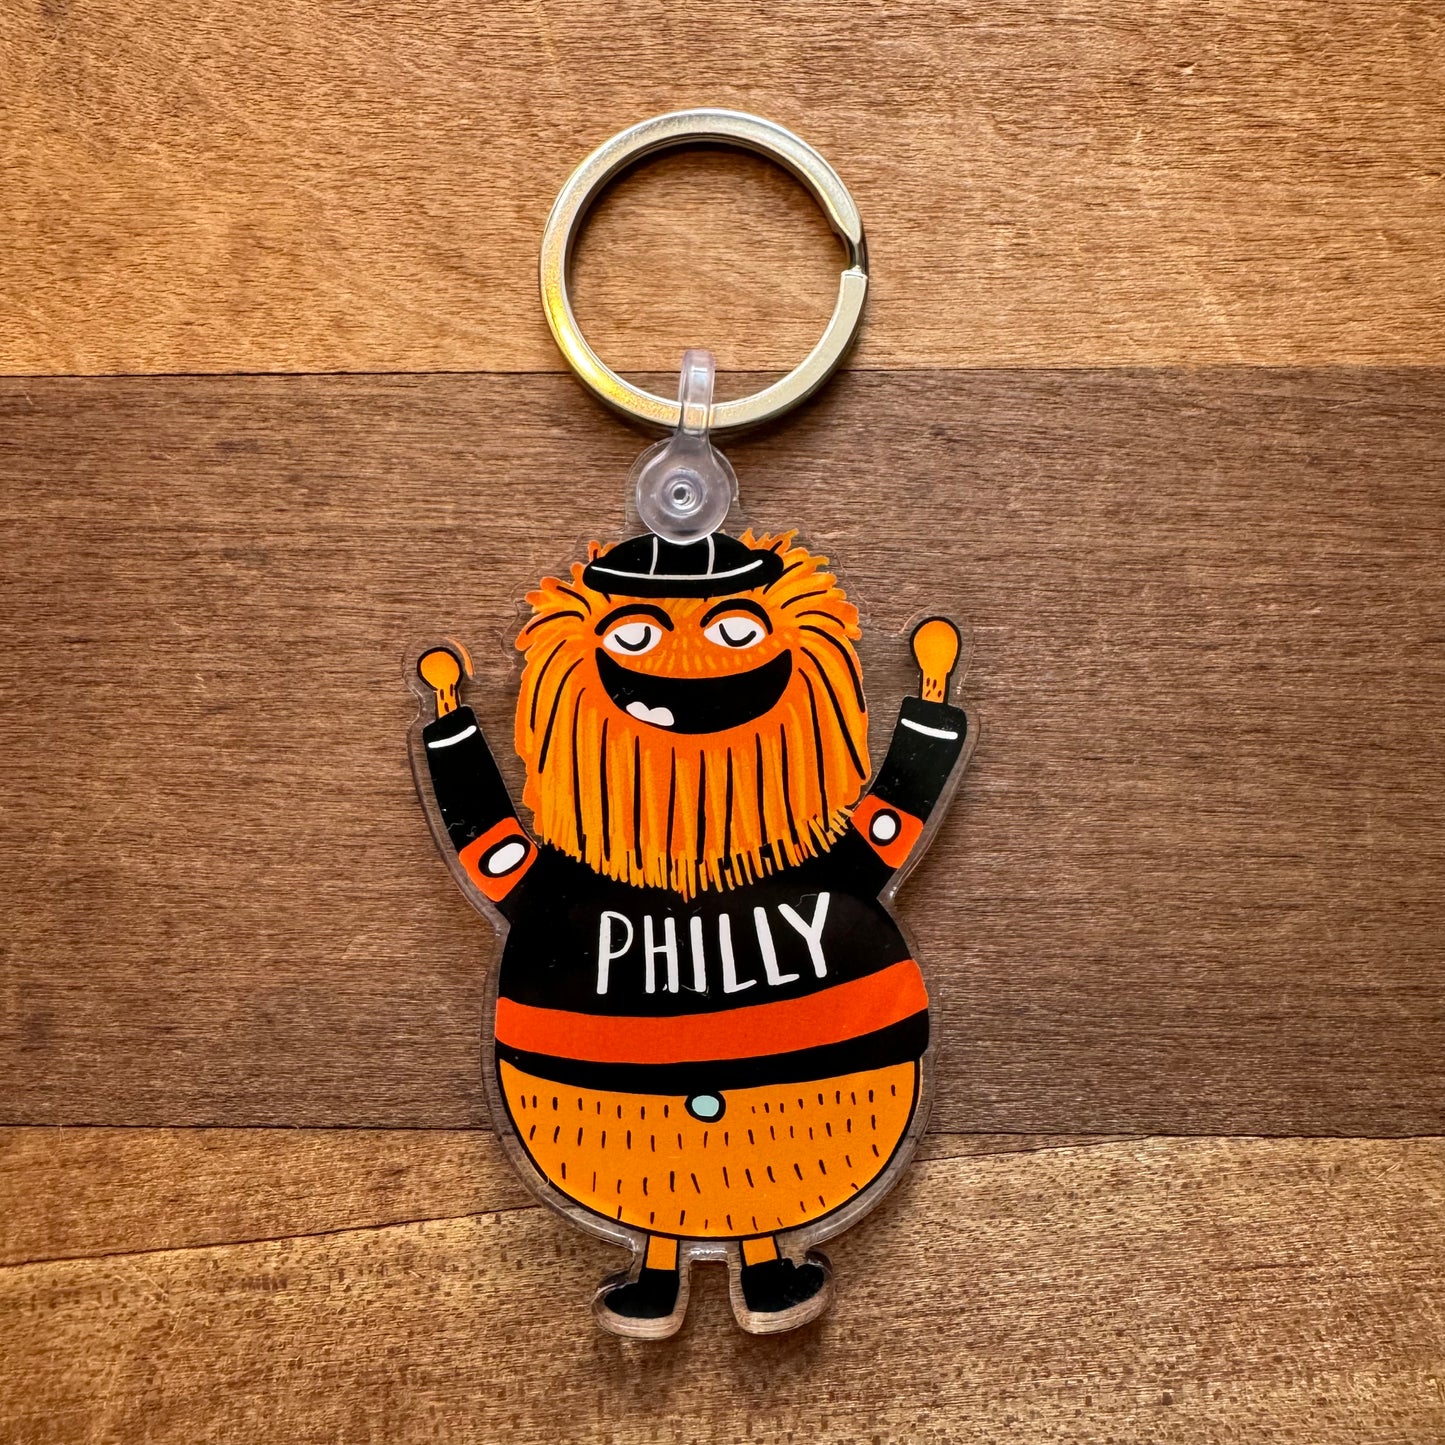 Keychain featuring an orange, fluffy character with raised arms, wearing a black shirt that says "PHILLY" and a beanie. This Gritty & Phanatic keychain by Ana Thorne is placed on a wooden surface, capturing the essence of Philly spirit.